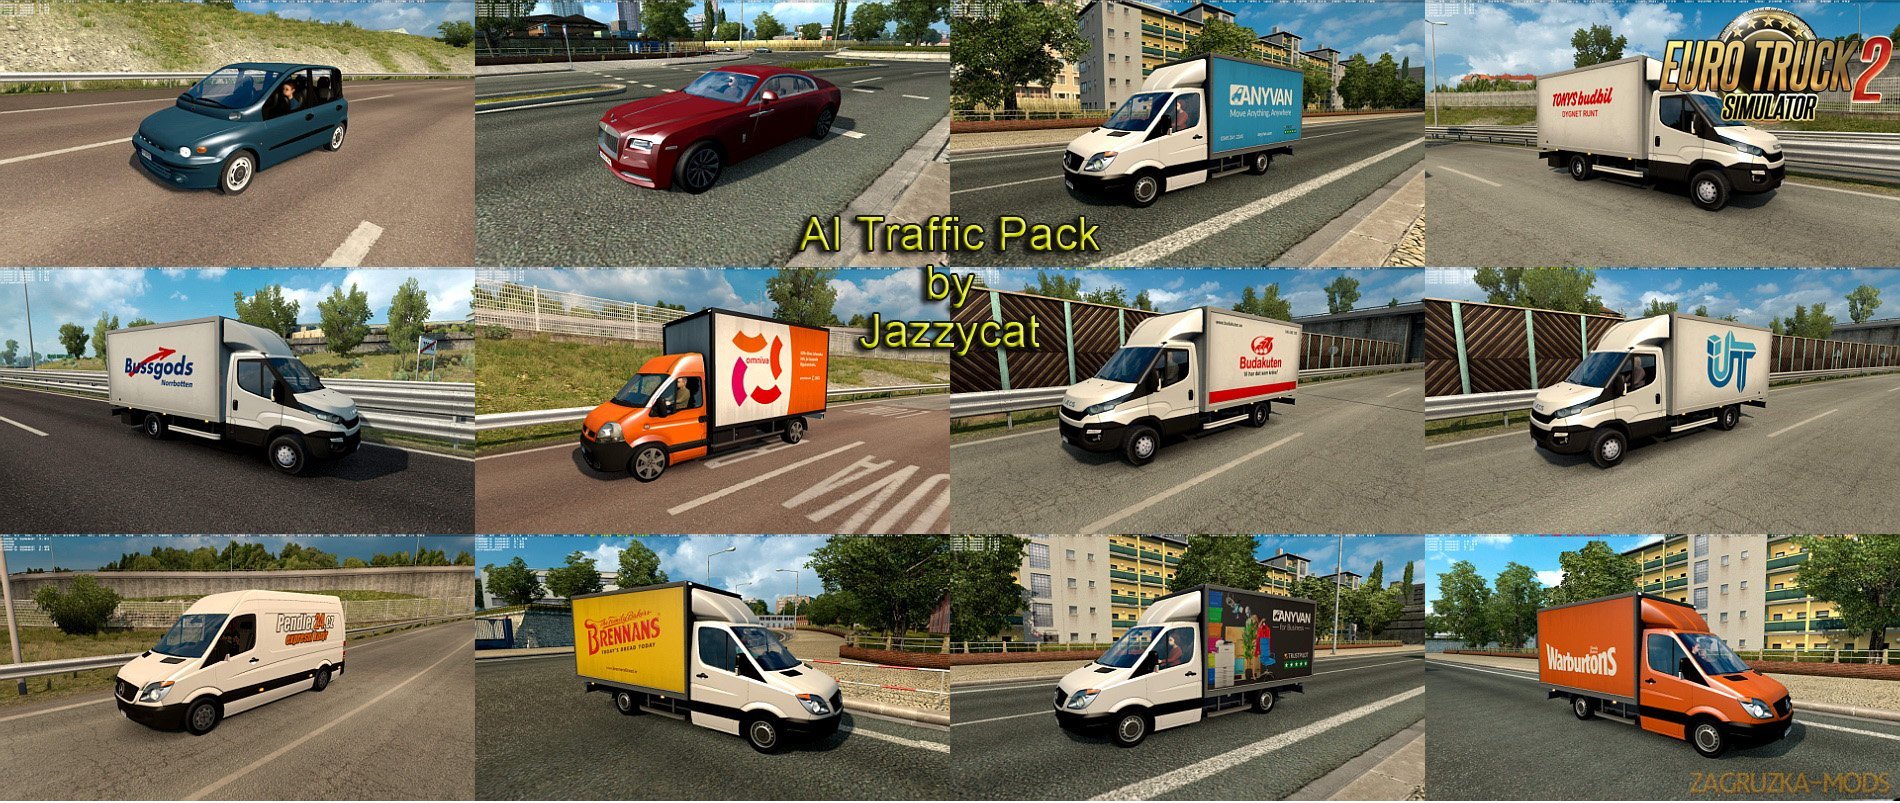 AI Traffic Pack v6.7 by Jazzycat